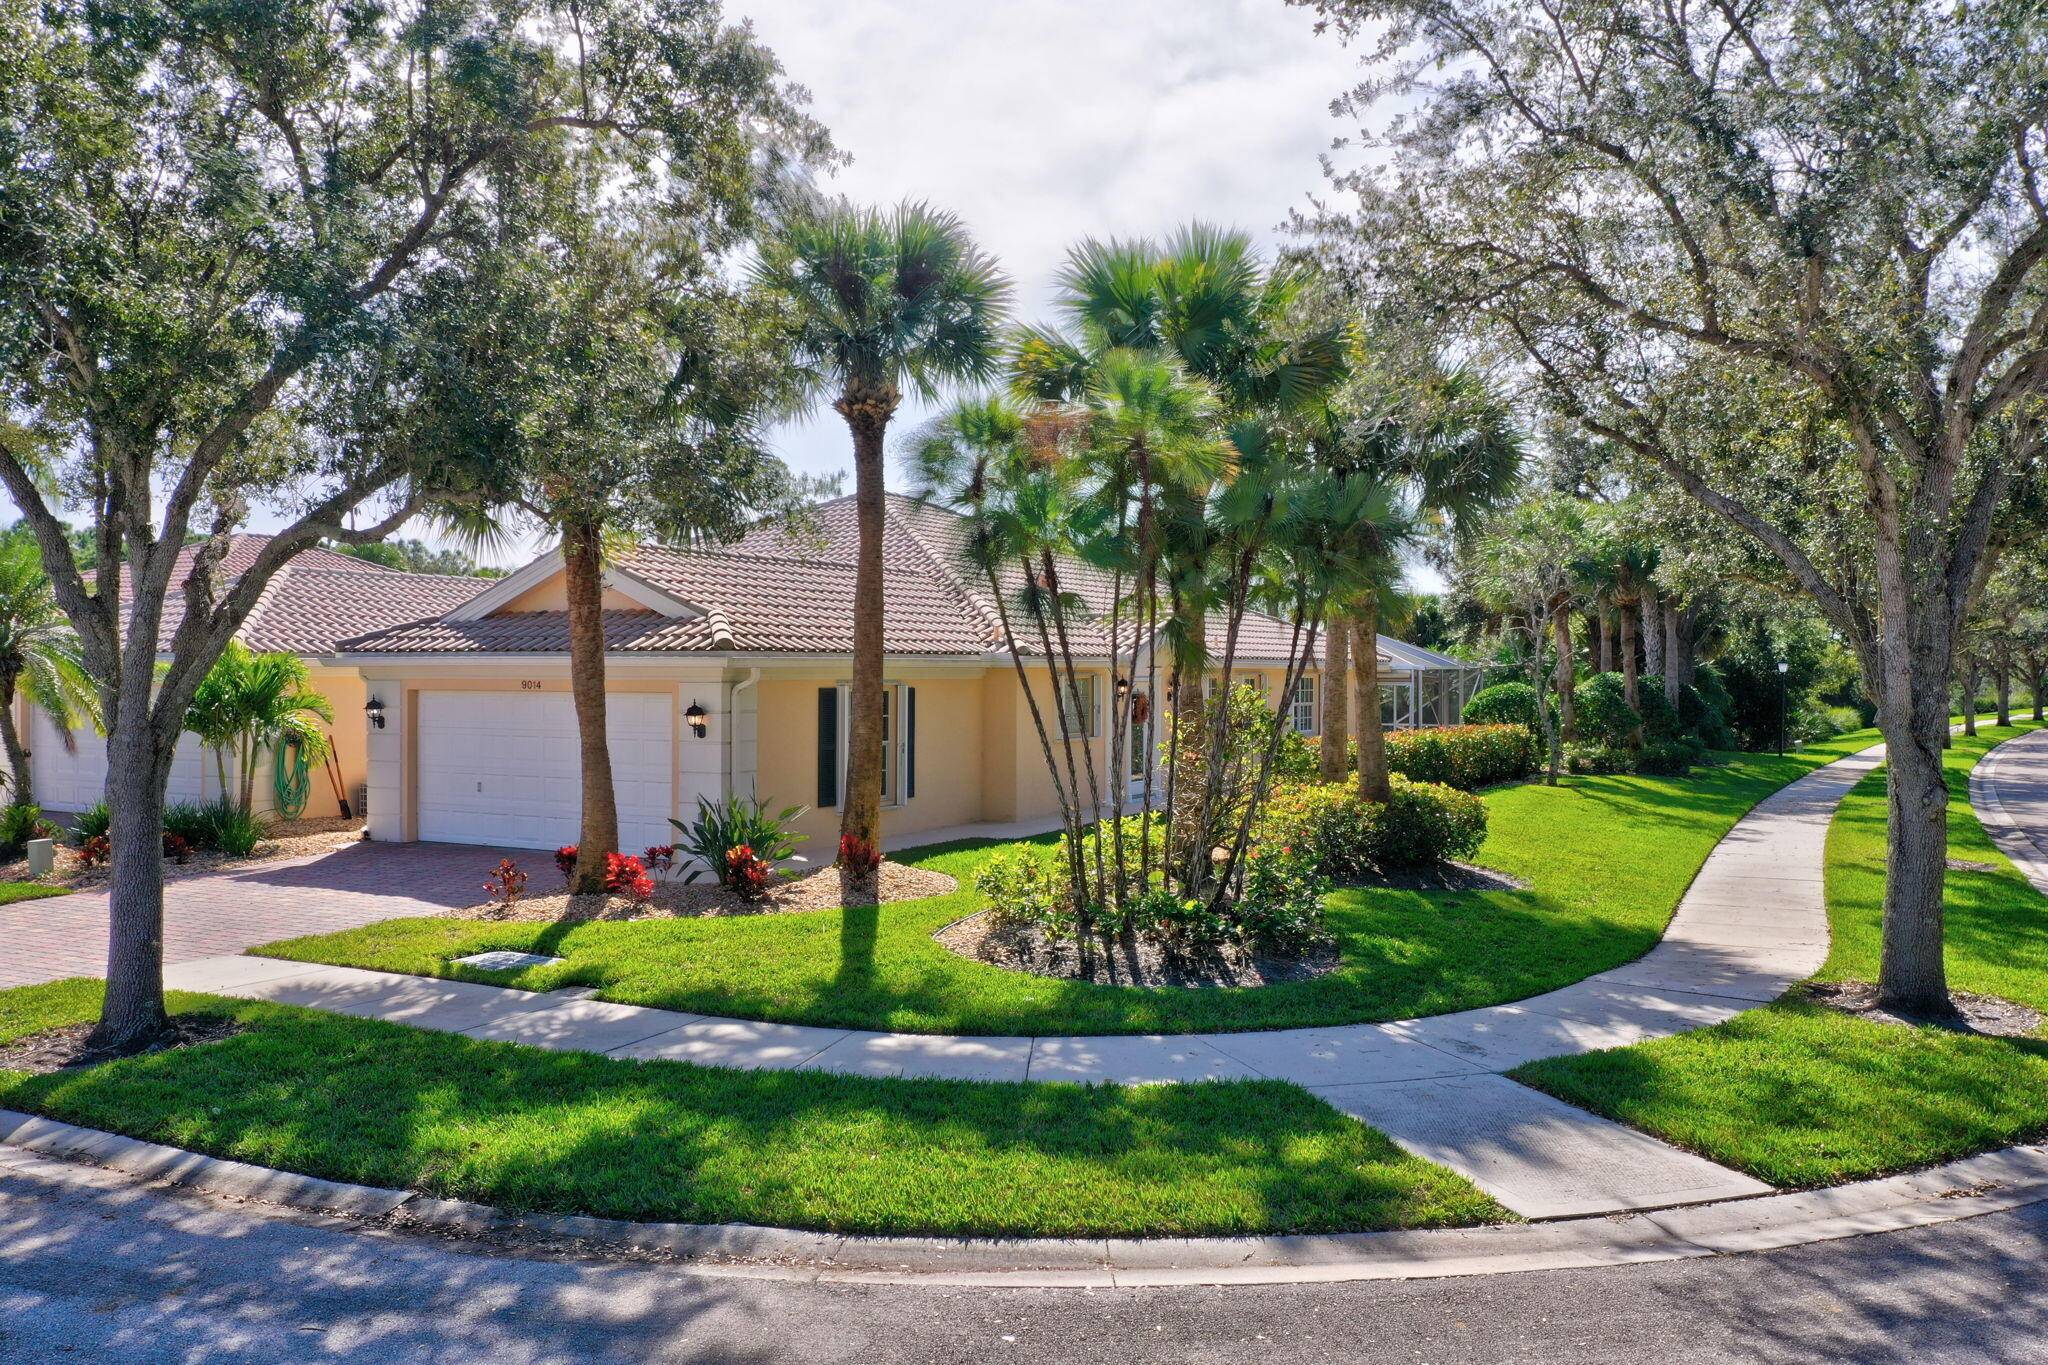 DISCOVER THIS BEAUTIFULLY UPDATED VILLA, INCLUDING QUARTZ KITCHEN COUNTERS, NEWER REFRIGERATOR, A C, WATER HEATER, COMMODES, FLOORING, CABINET PULL OUTS, CUSTOM HUNTER DOUGLAS PLANTATION AND SLIDING DOOR BLINDS.